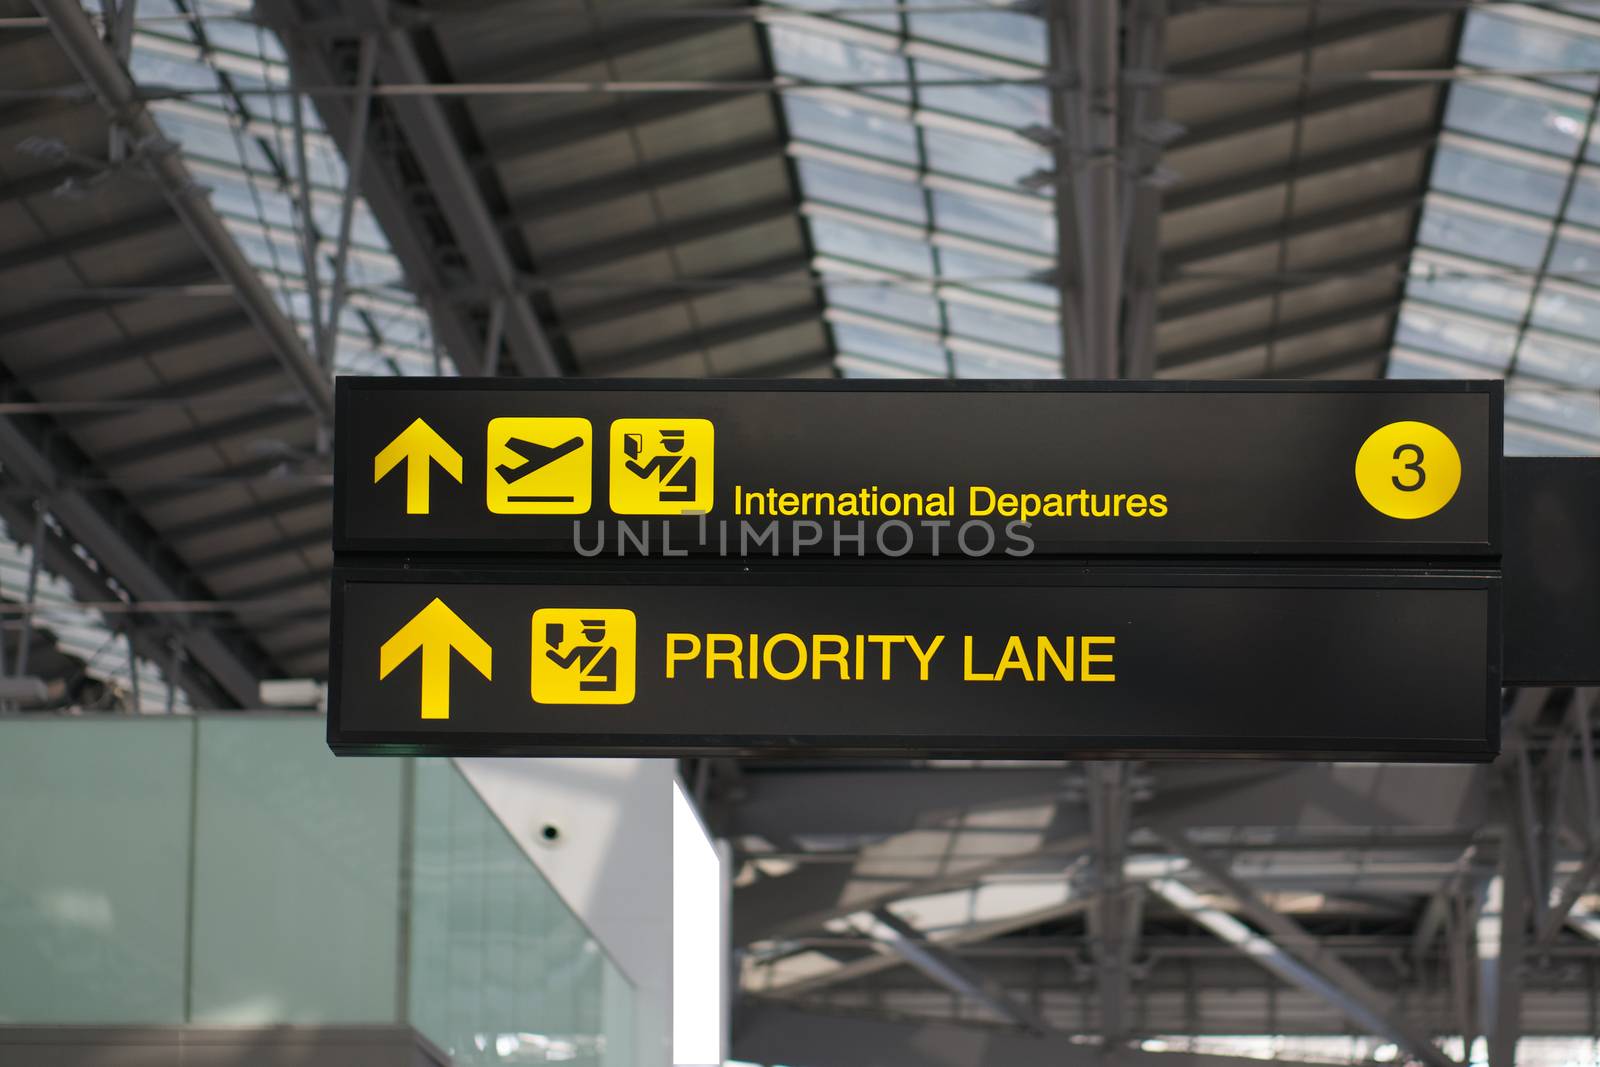 Departure and priority lane board sign at international airport by eaglesky